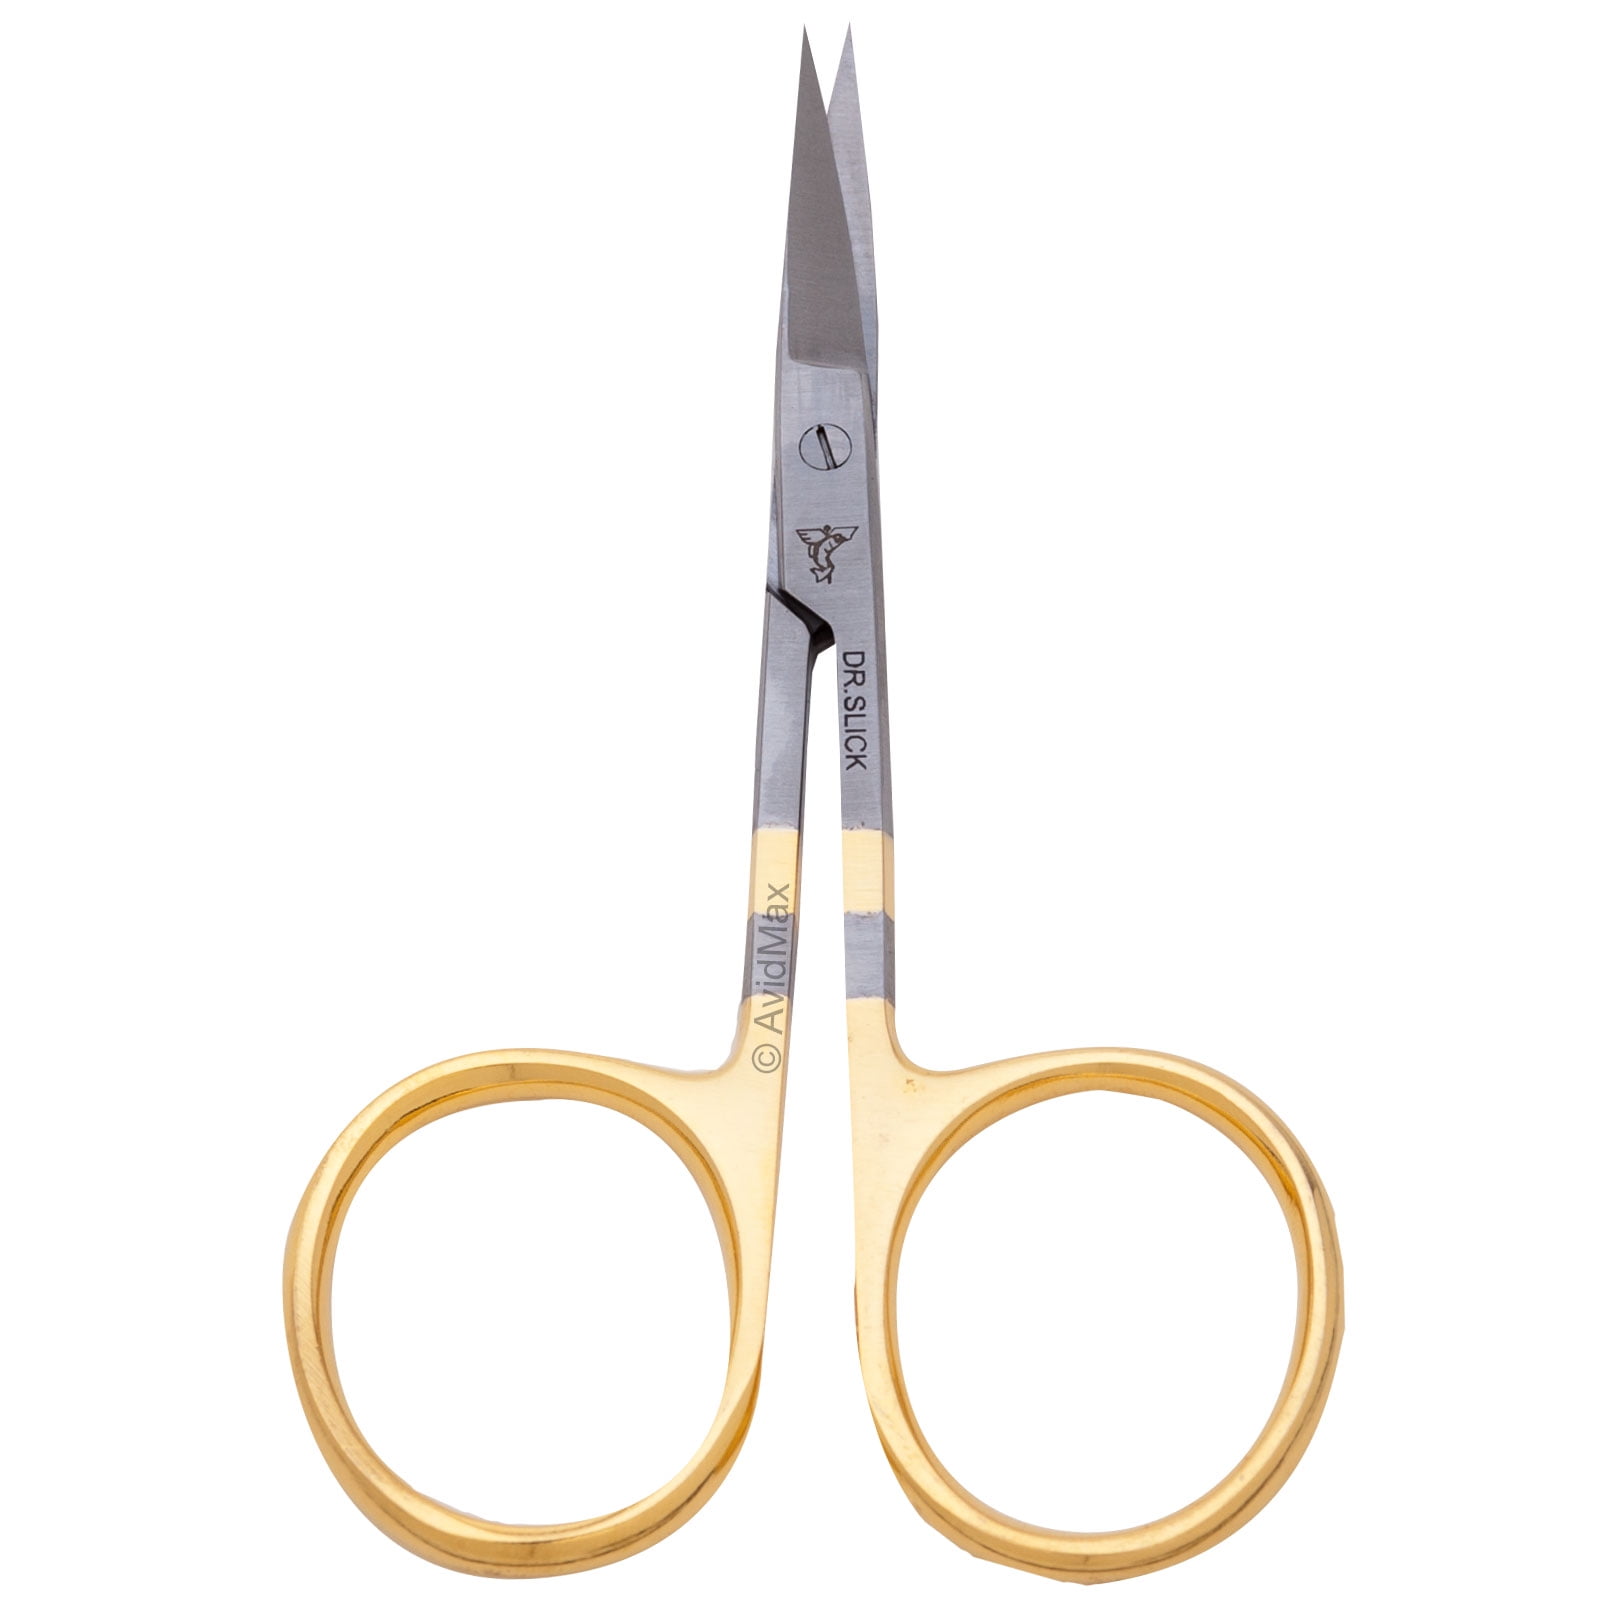 Tungsten Carbide Fly Tying Scissors Straight /& Curved Blade 3.5/" And 4/"